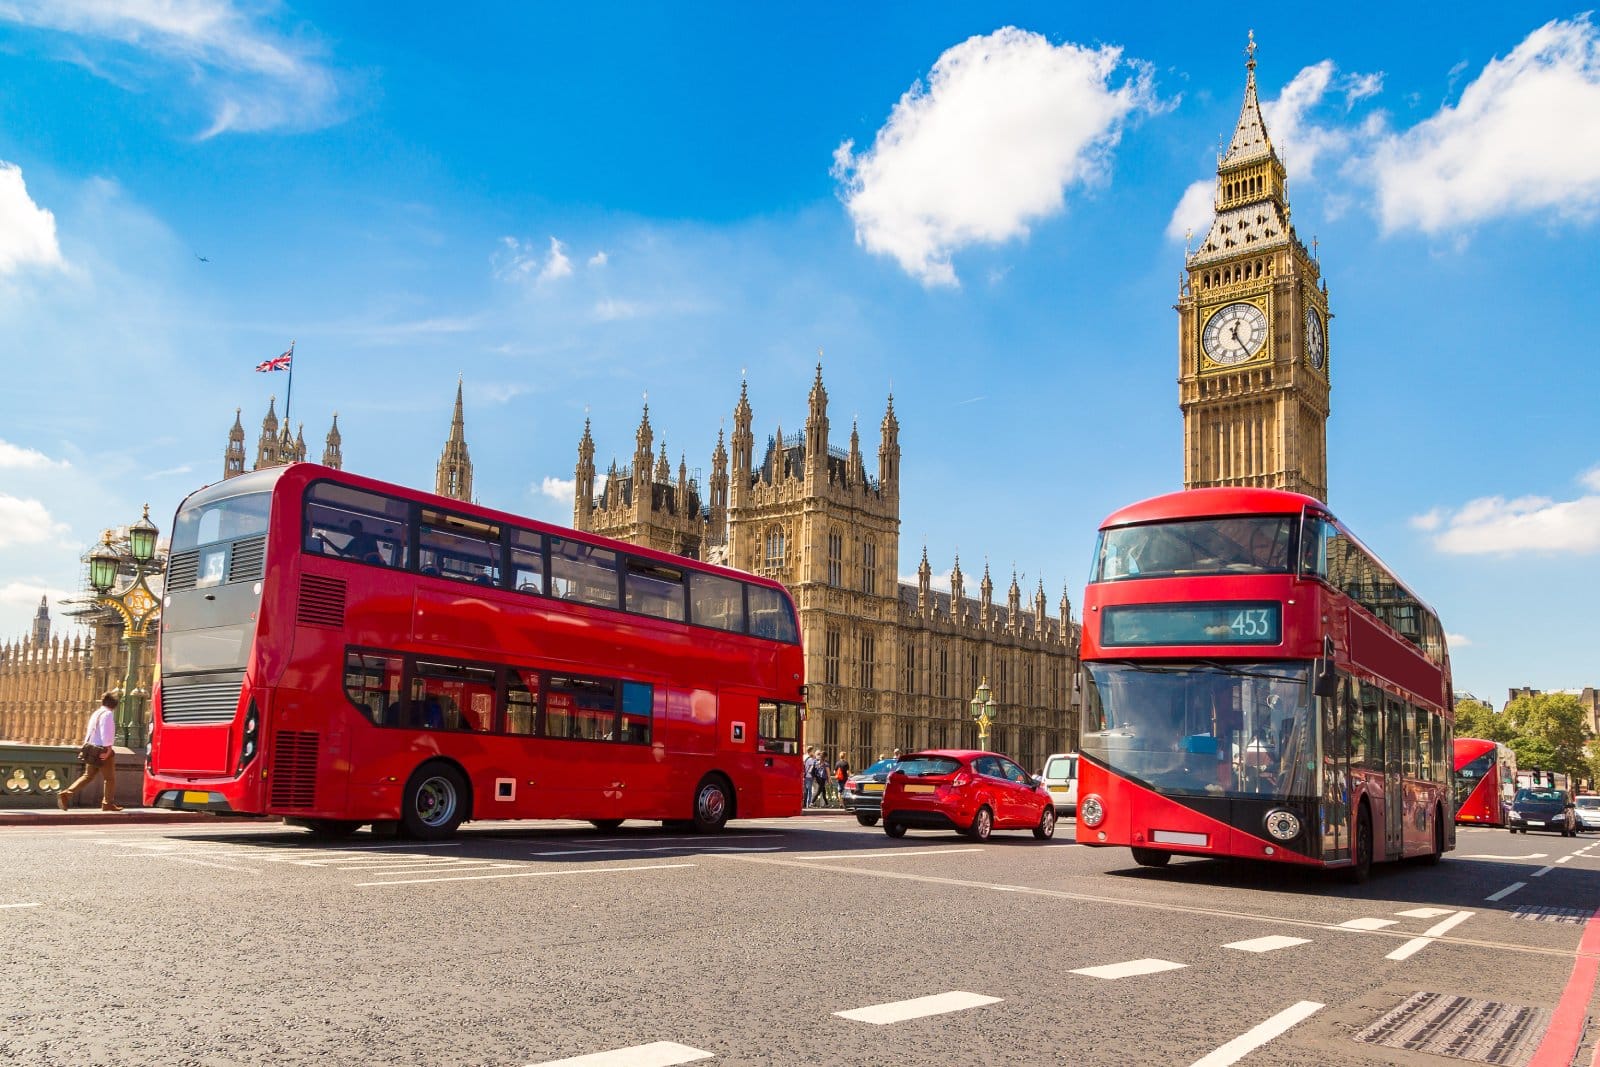 Image Credit: Shutterstock / Sergii Figurnyi <p><span>Advocating for improvements and investments in public transport to address climate change and improve daily commutes for the populace.</span></p>